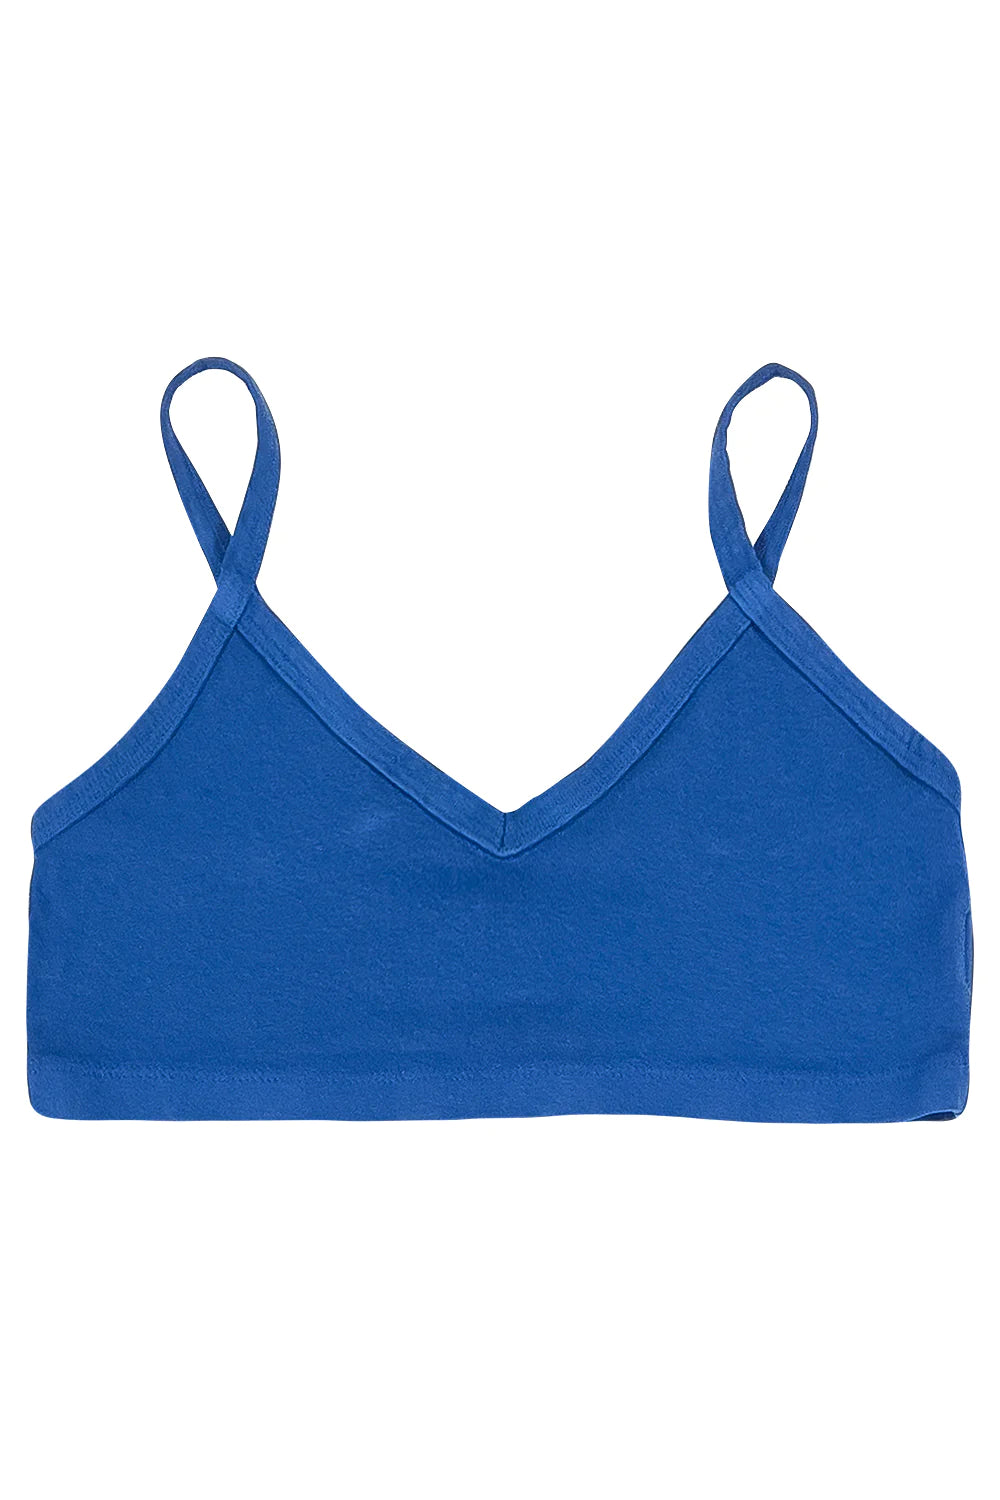 Zenana Outfitters bralette 2X/3X Blue - $16 (38% Off Retail) - From